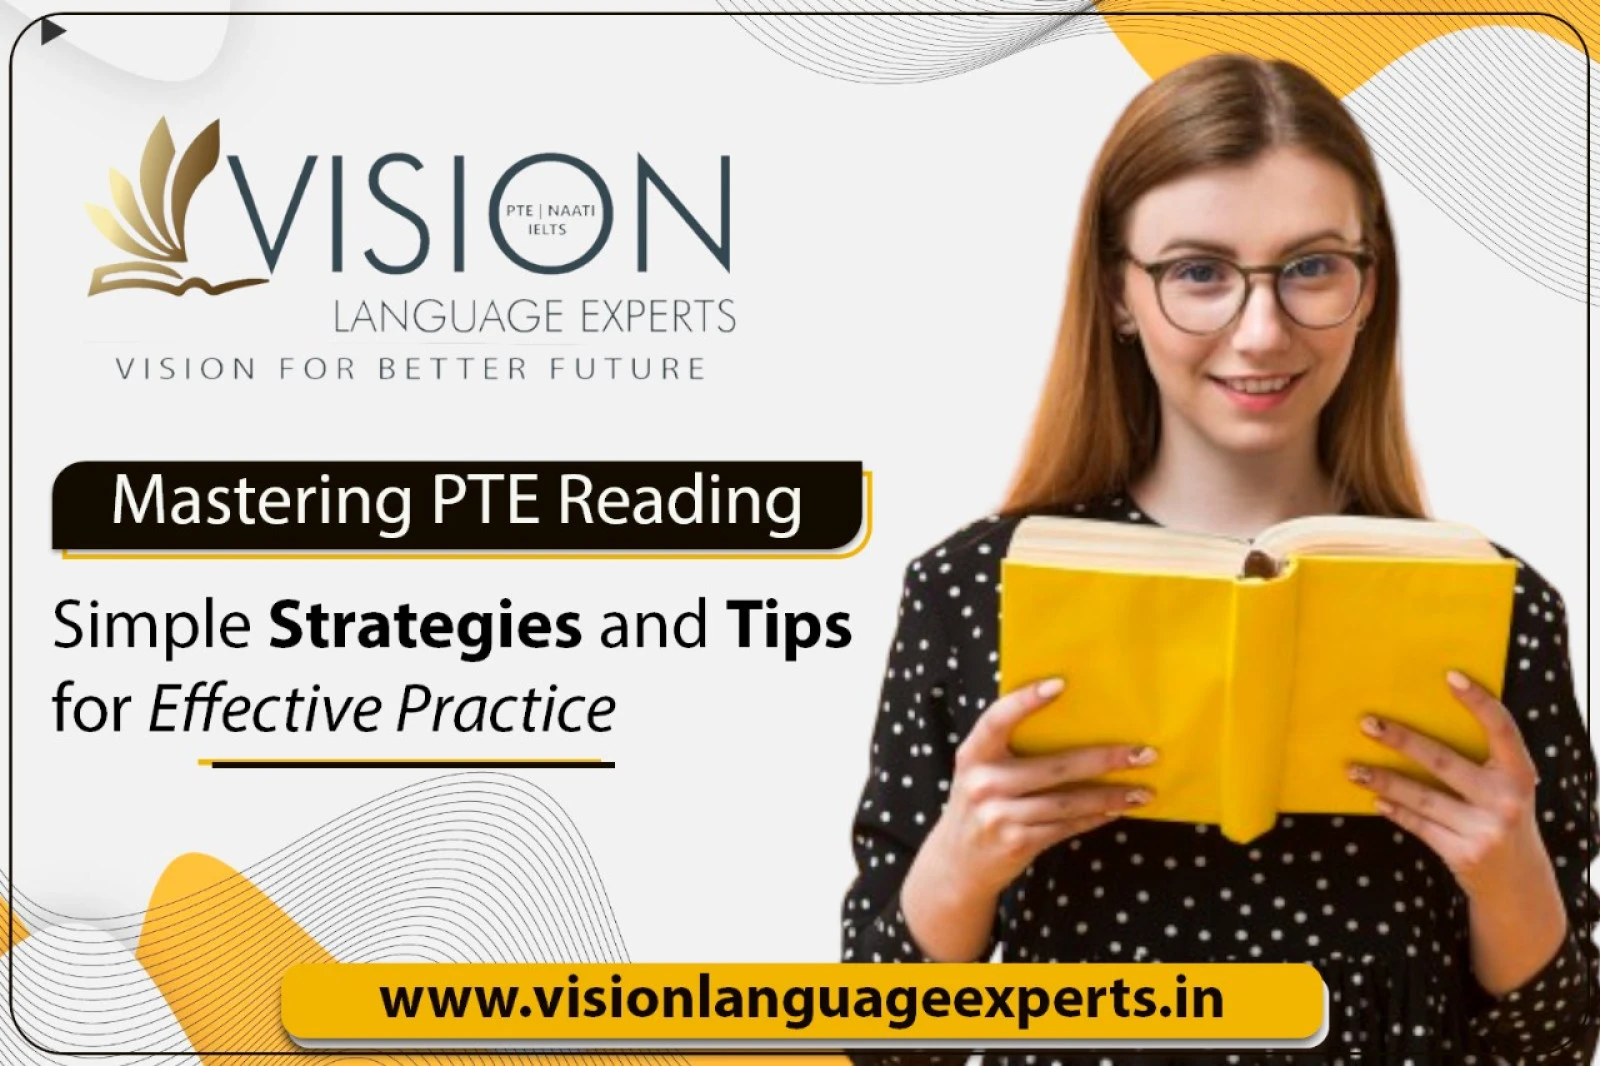 Mastering PTE Reading: Simple Strategies and Tips for Effective Practice